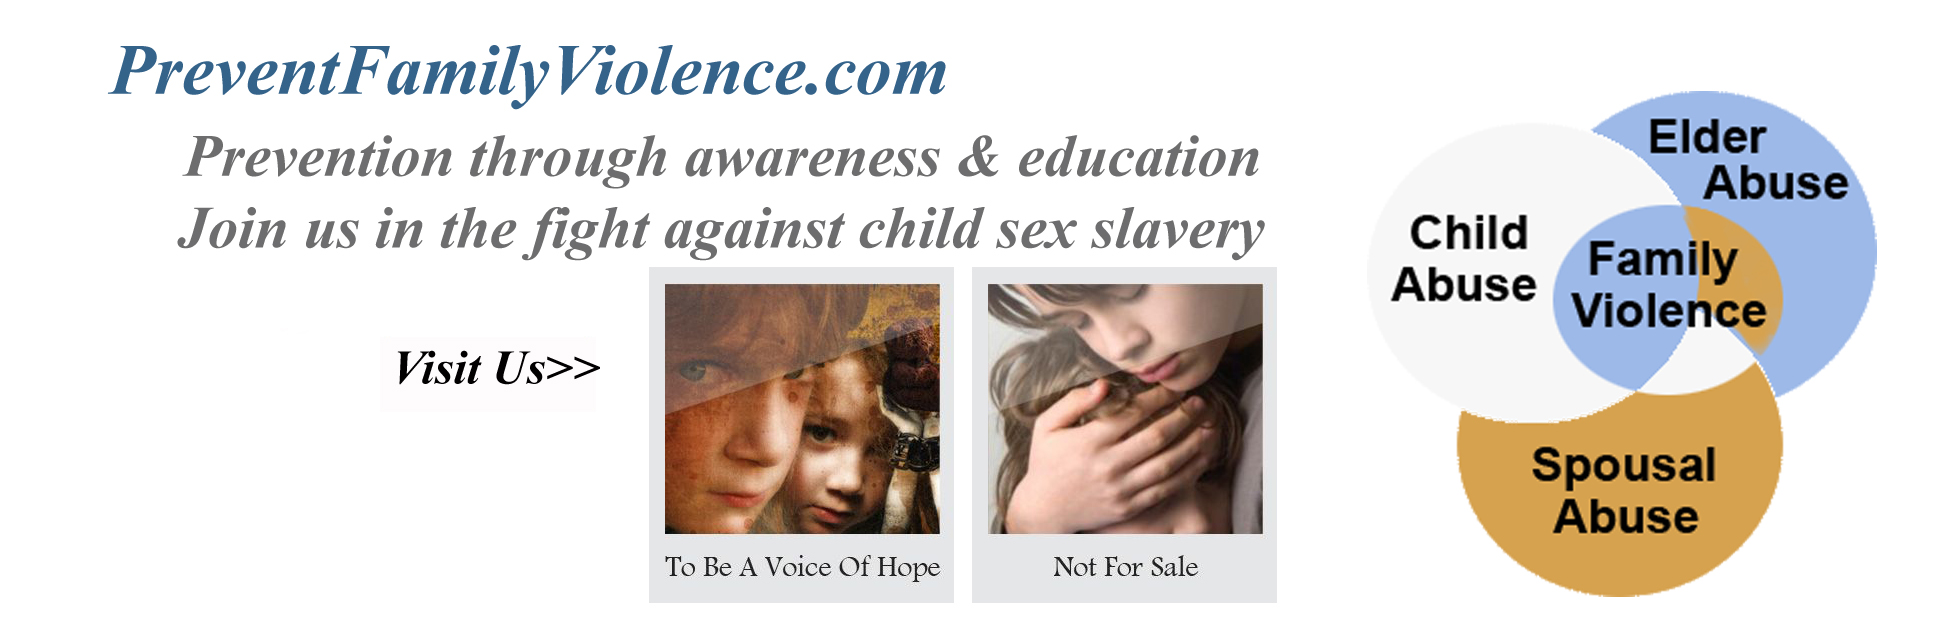 Prevent Family Violence, helping to bring families together through education and awareness